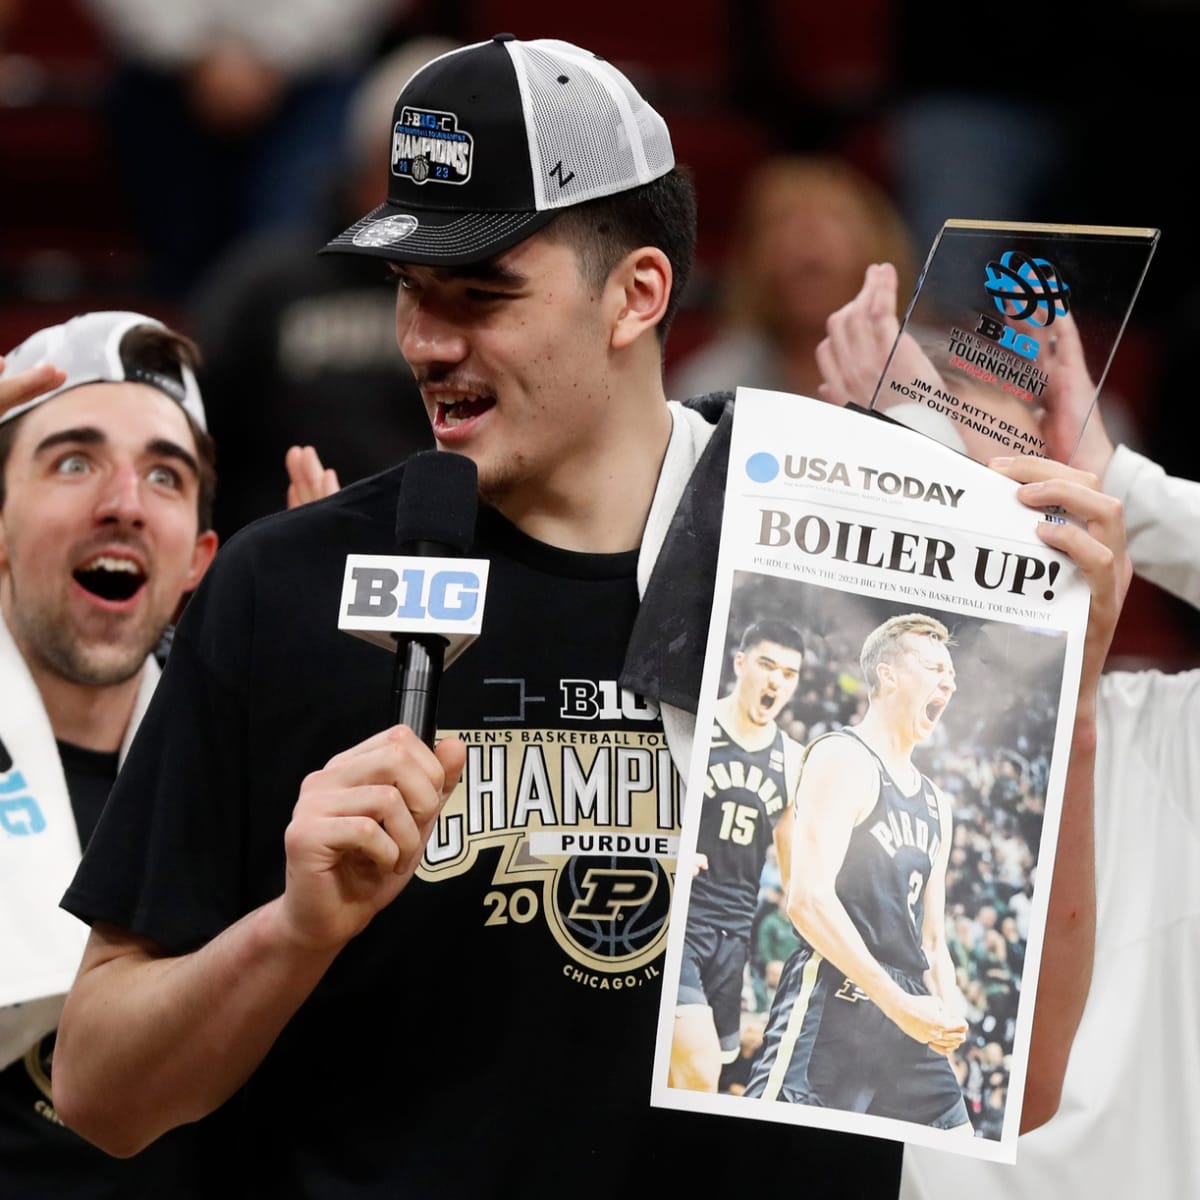 New Purdue Big Ten Championship T-Shirt Available - We Got What We